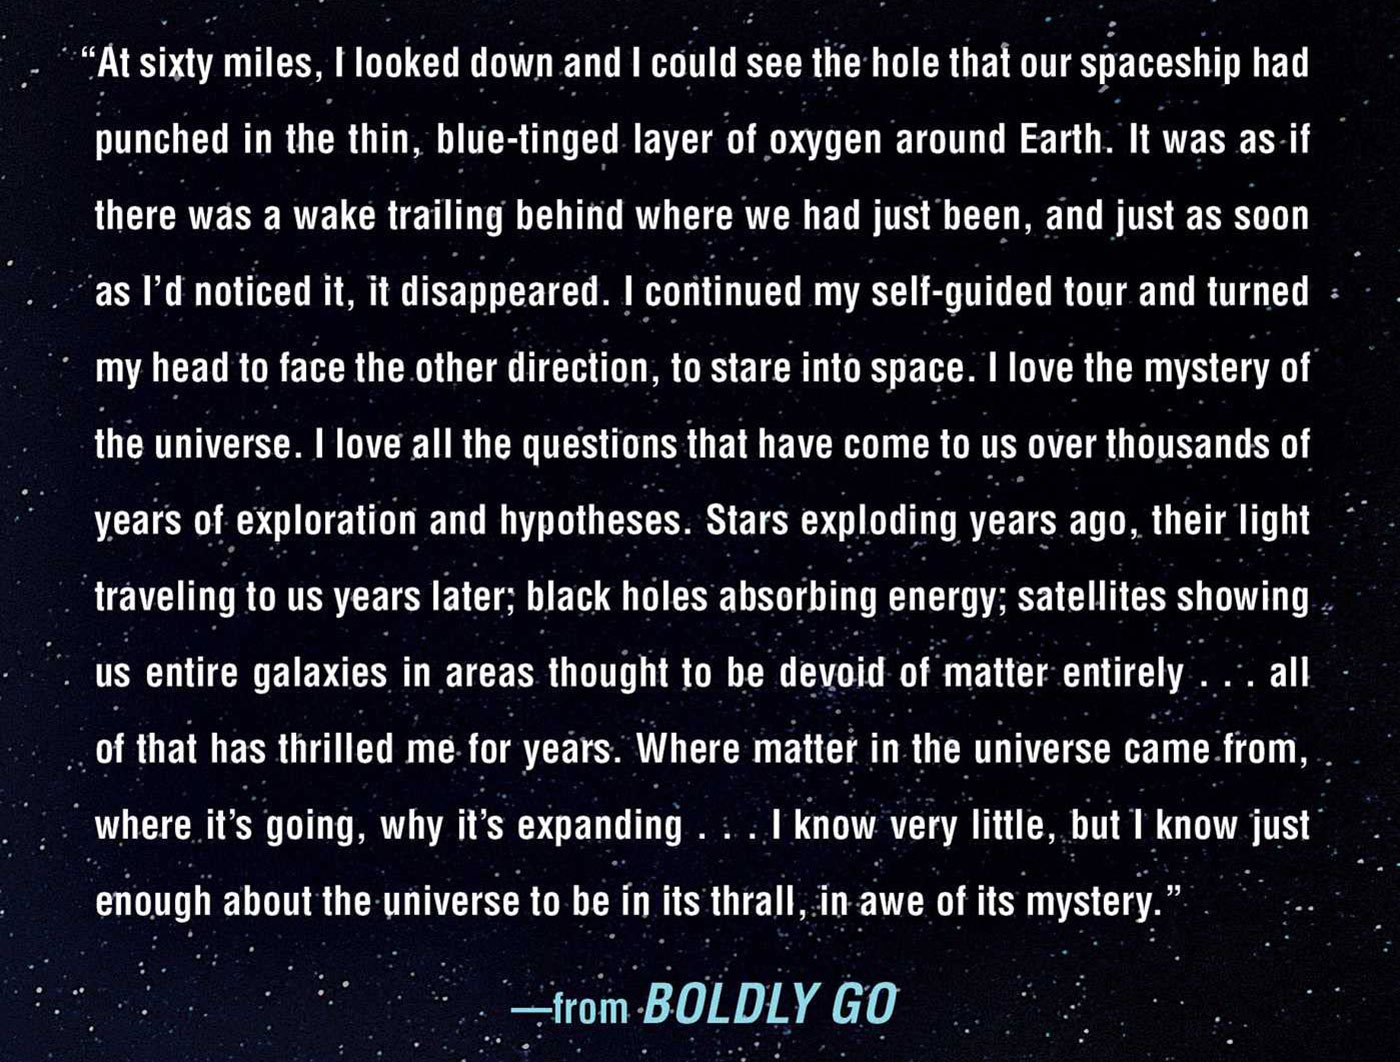 The back cover of “Boldly Go”